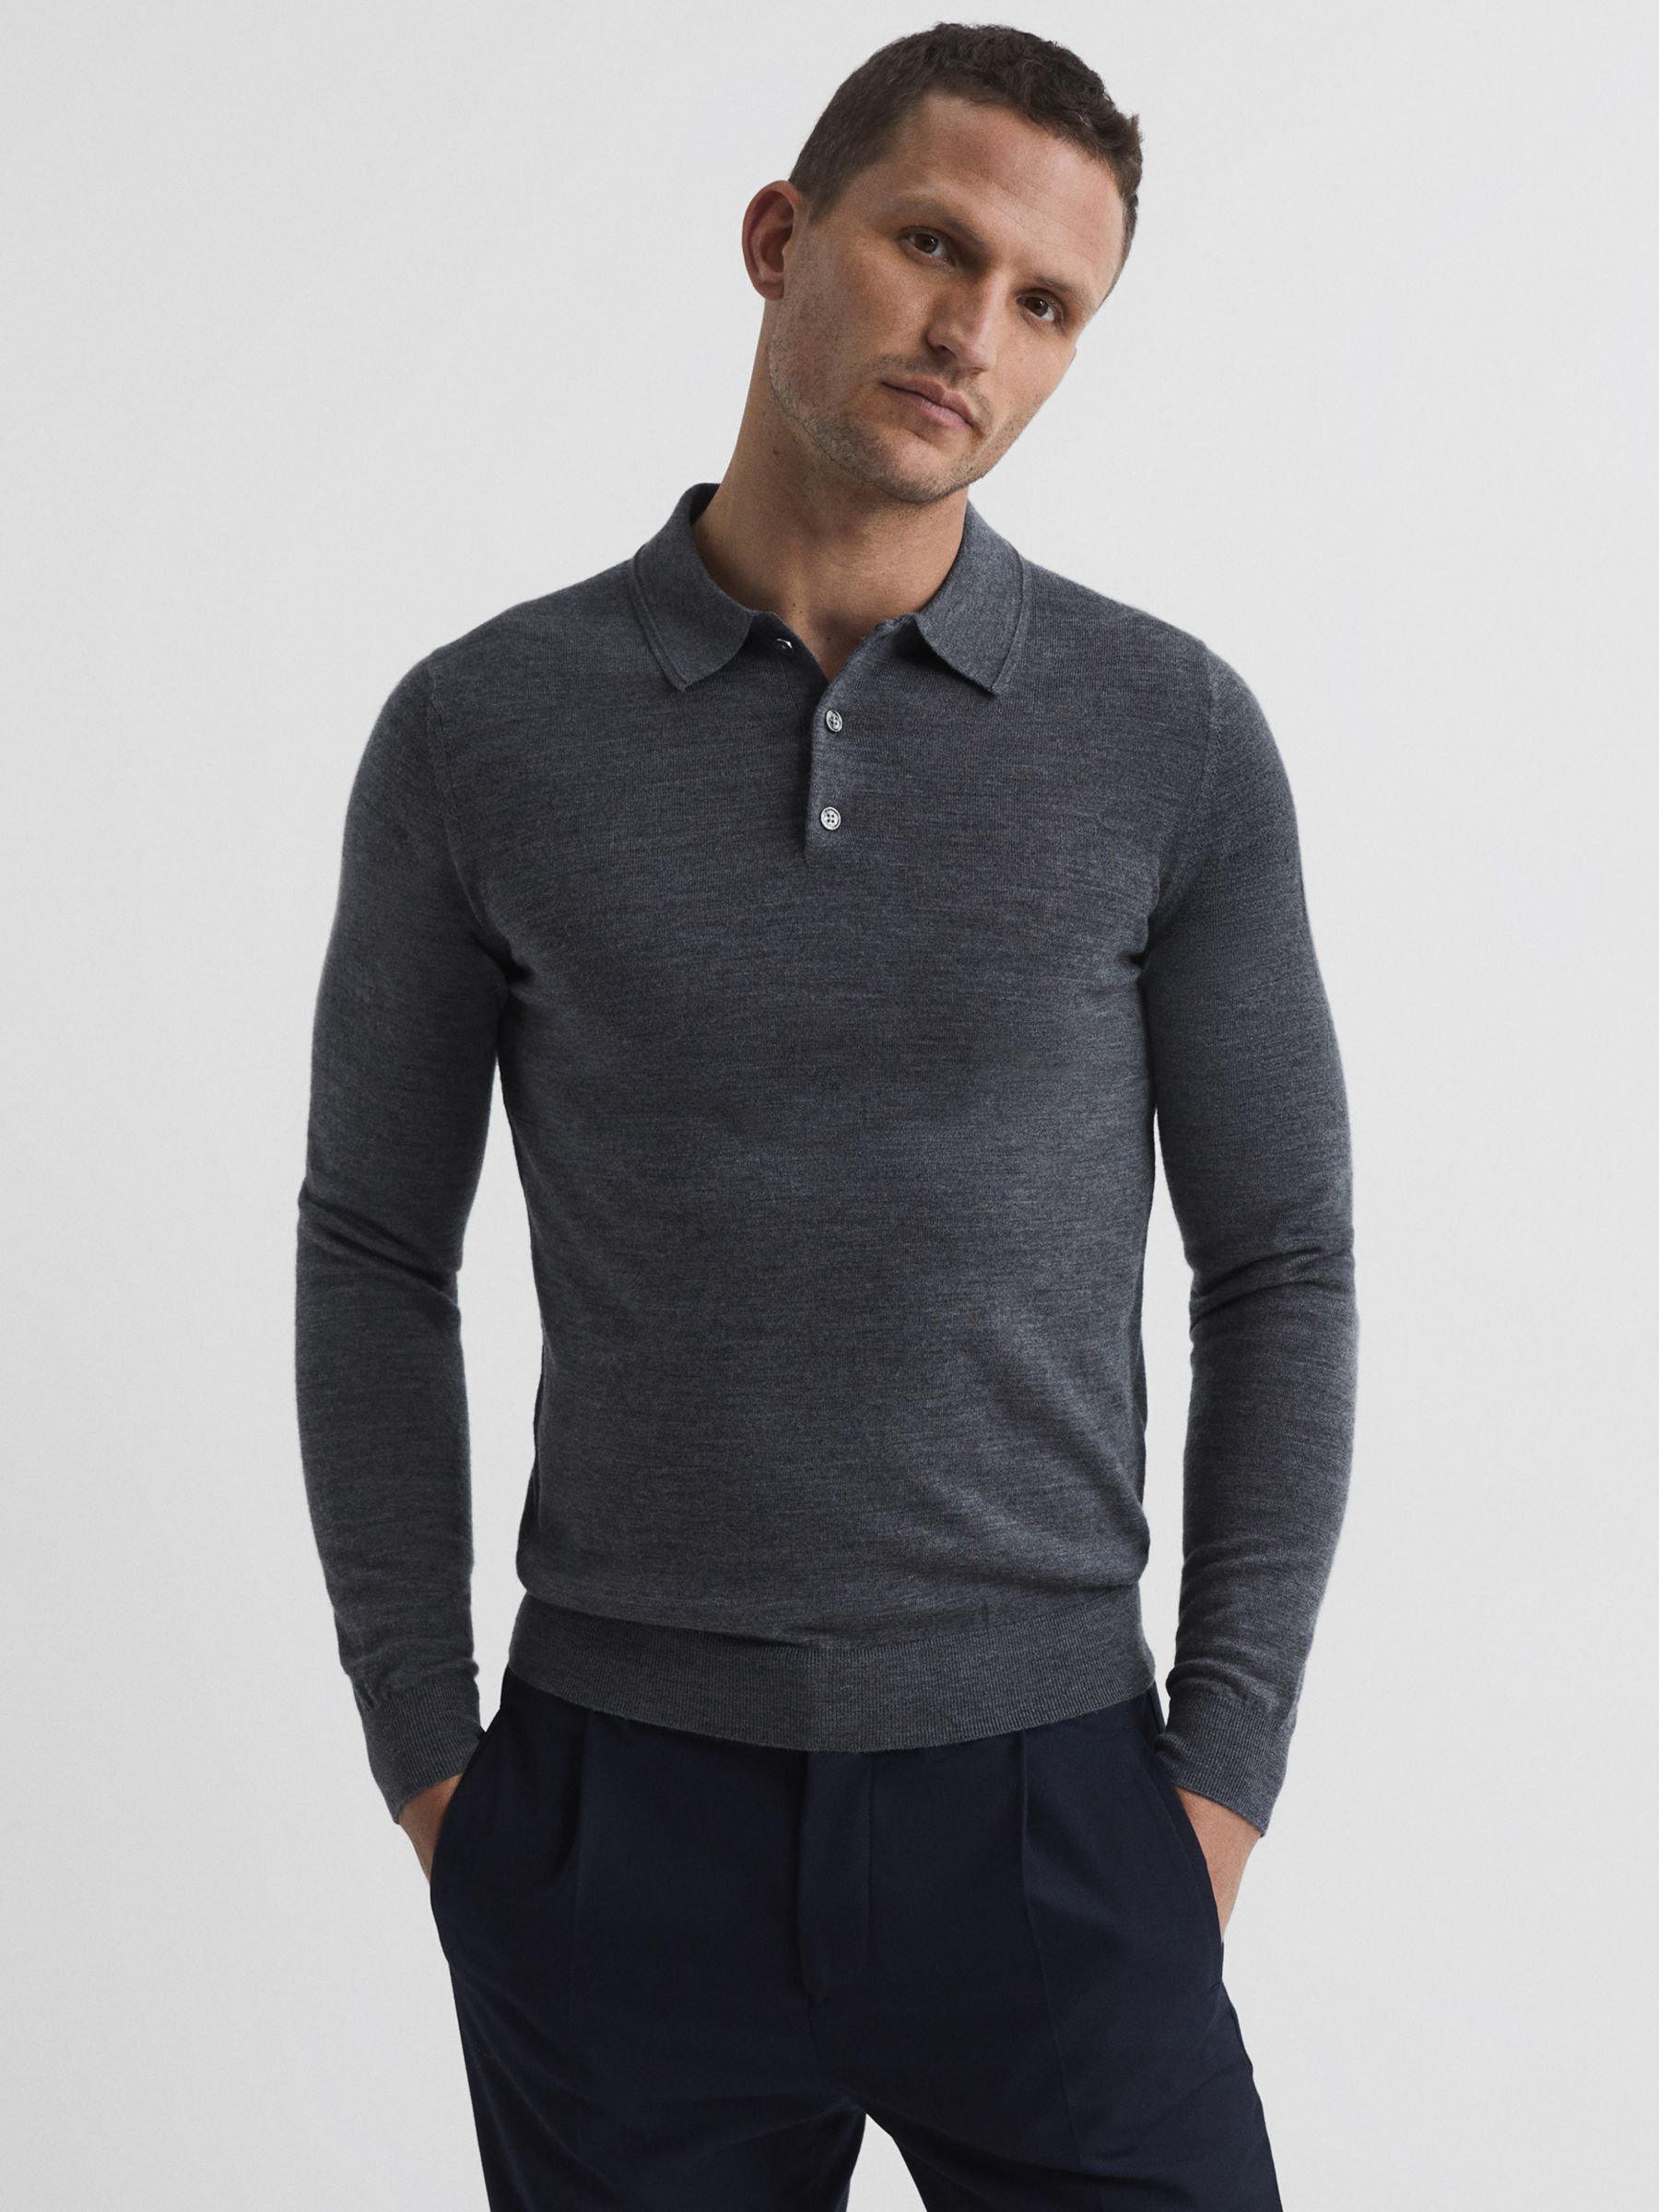 Reiss Trafford Knitted Wool Long Sleeve Polo Top, Mid Grey Melange at ...